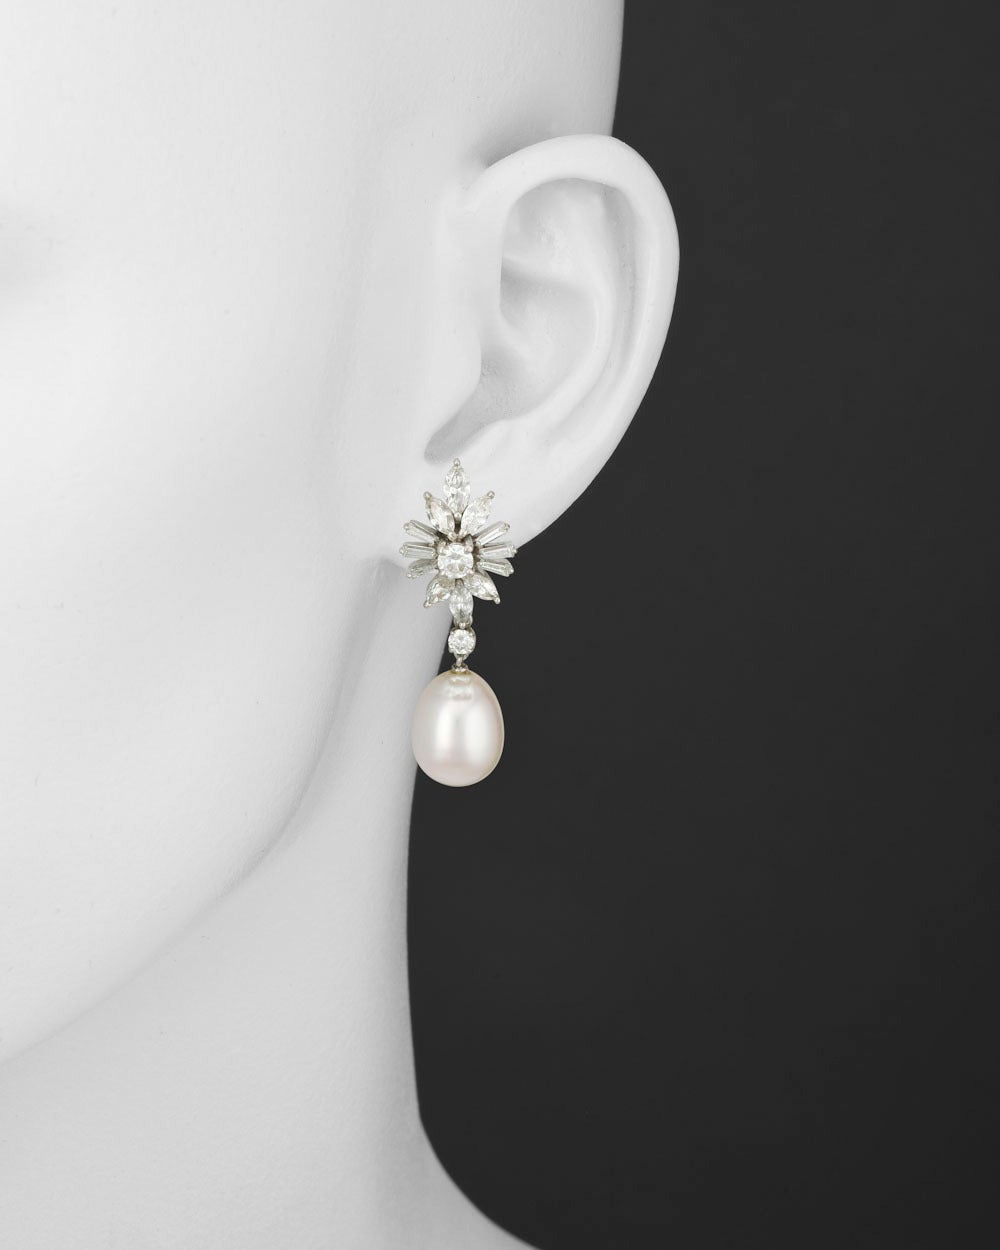 Pearl and diamond cluster pendant earrings, composed of a cultured pearl drop suspended from a marquise-shaped, baguette-cut and circular-cut diamond cluster surmount, mounted in platinum, with clip and post backs. 1.65